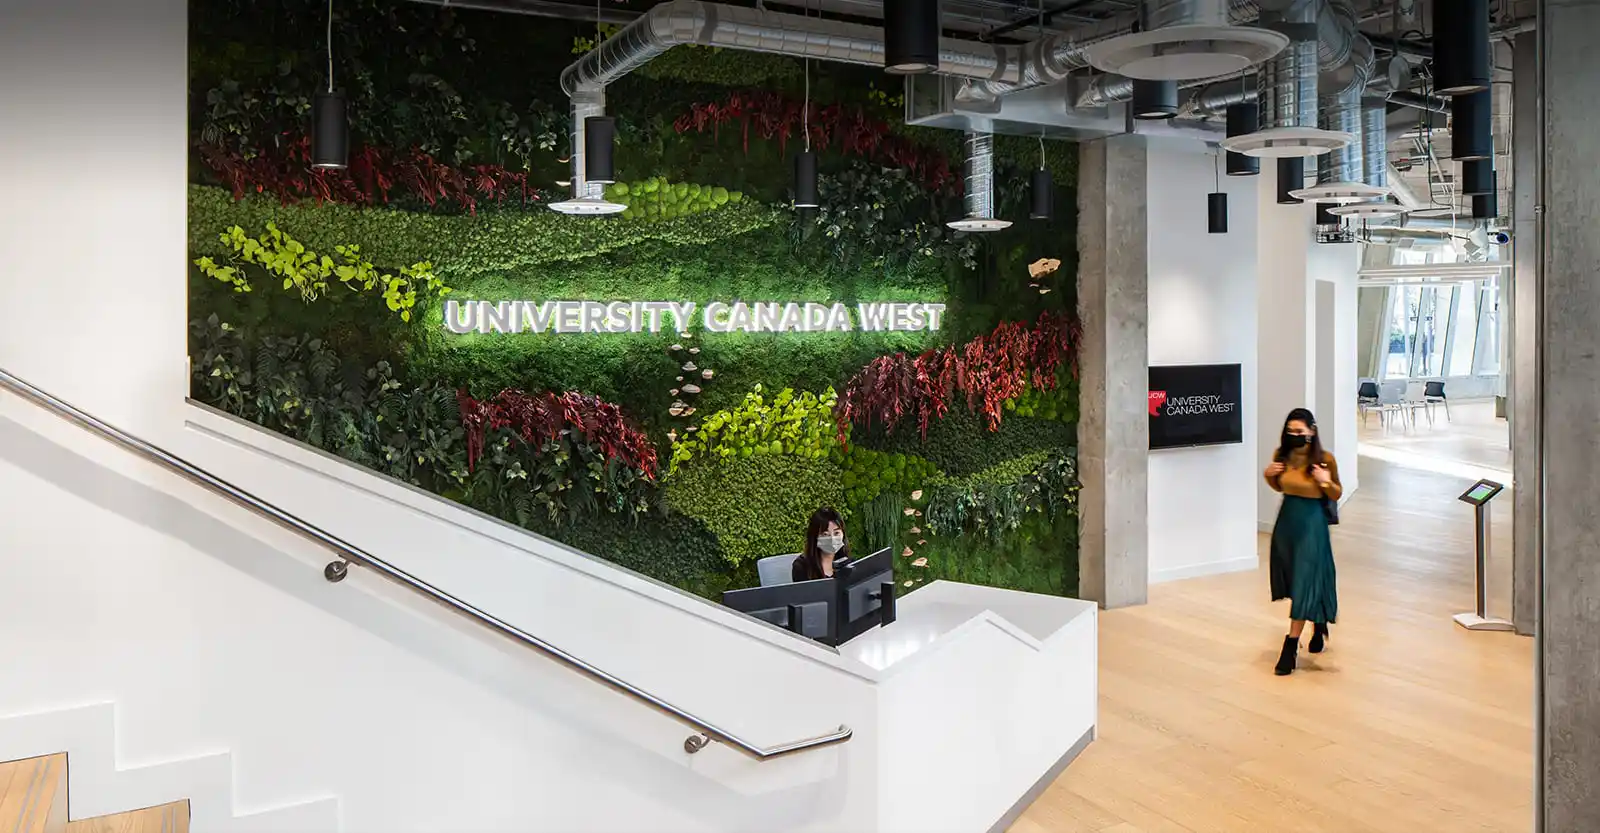  University Canada West returning to on-campus classes in February